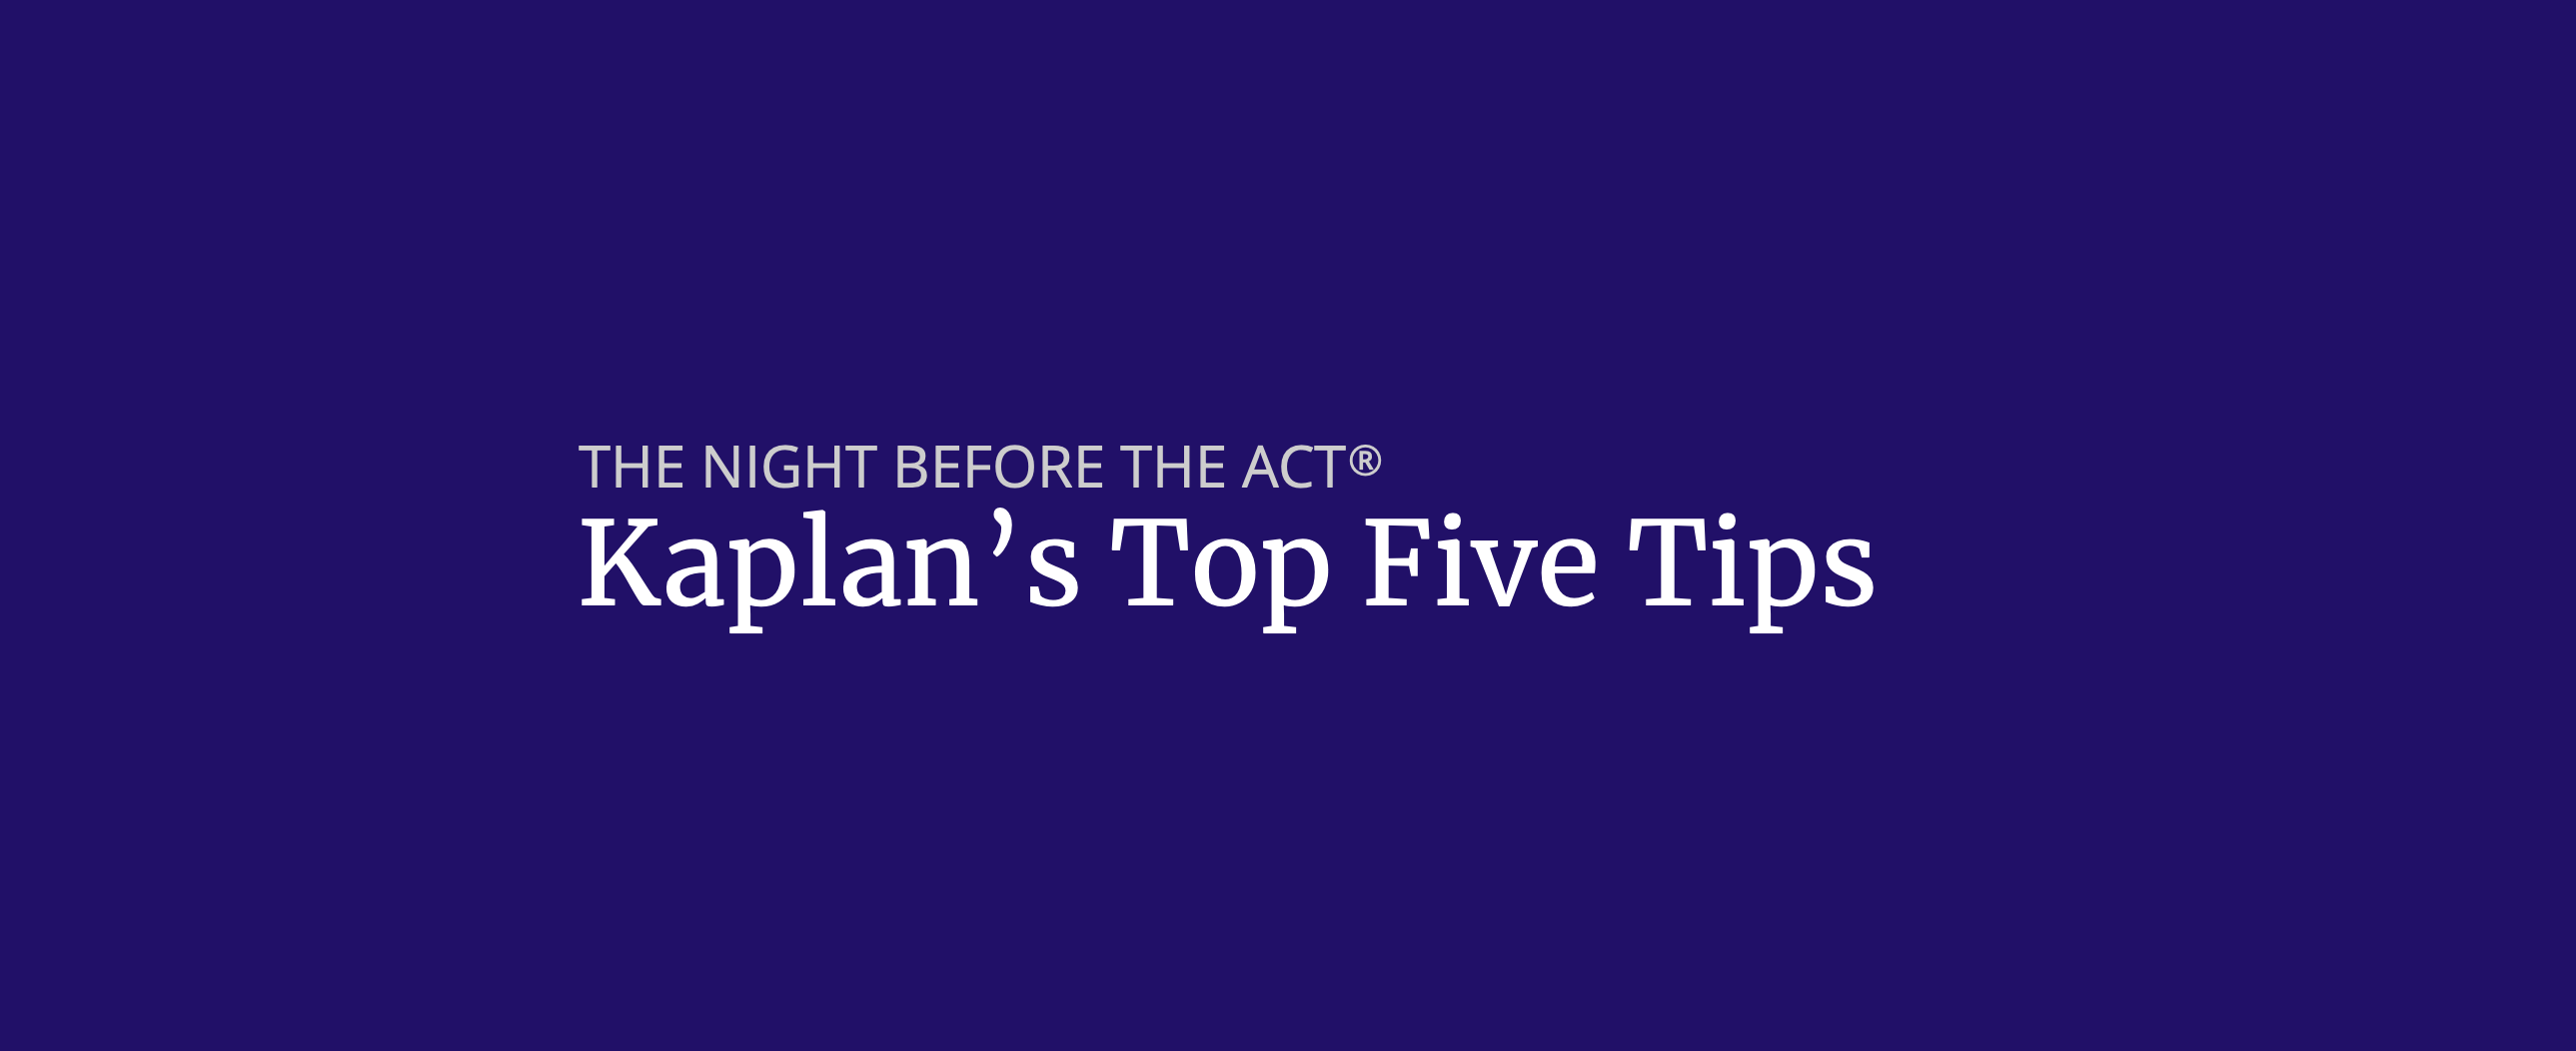 Night Before the ACT Top Tips